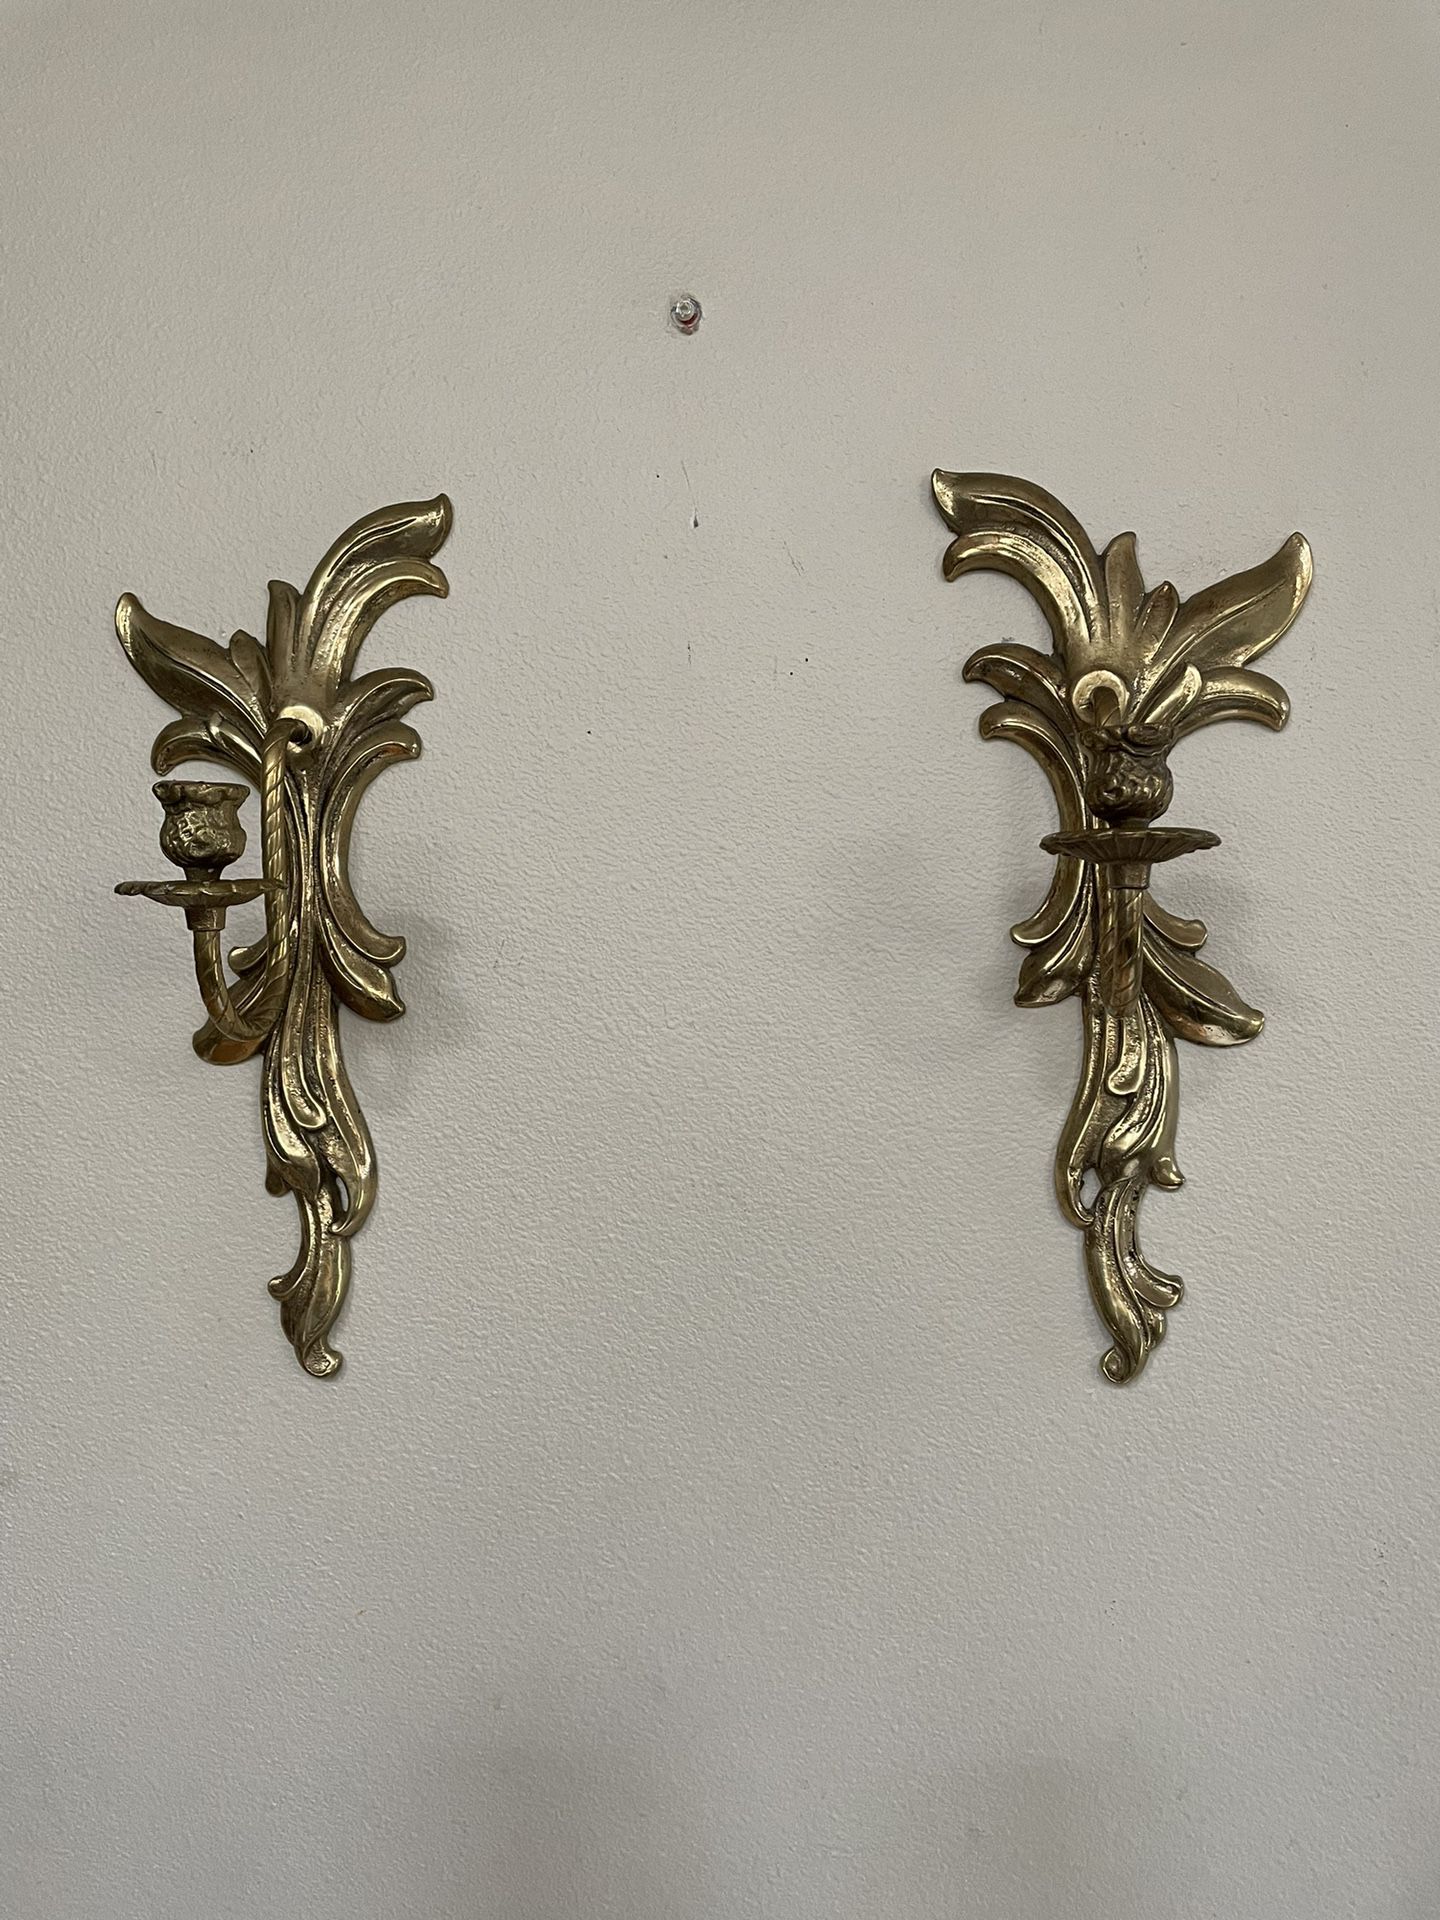 Vintage Pair Brass Baroque Wall Sconces Candle Holder 15”x6”